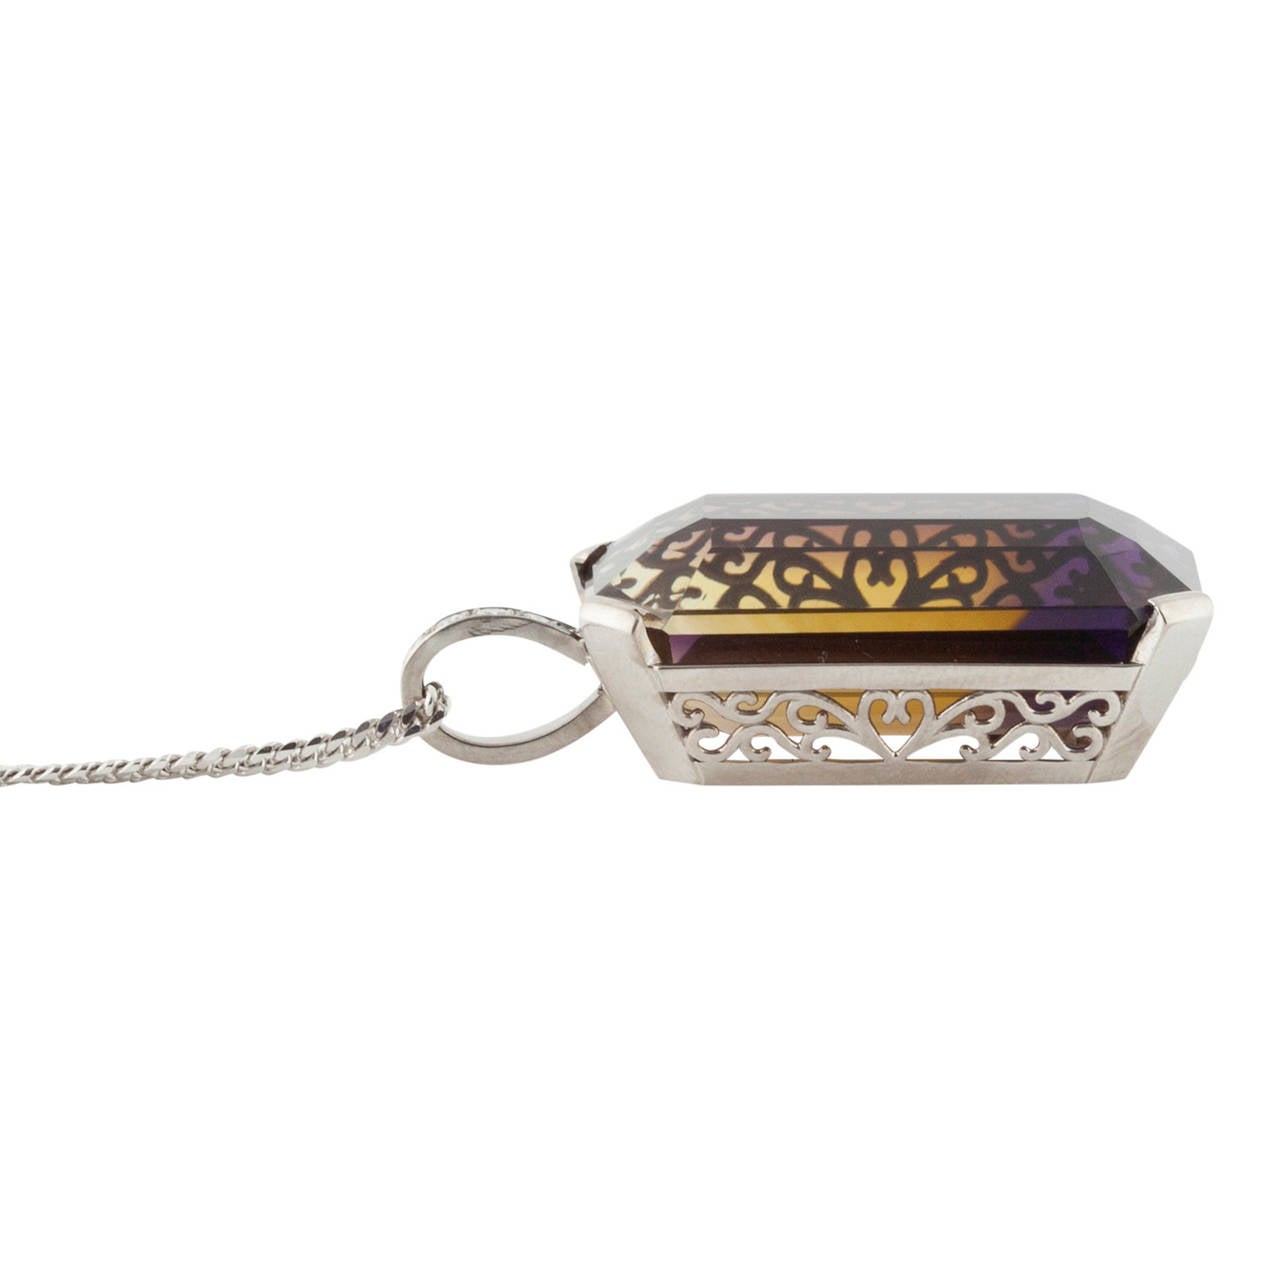 18ct white gold handcrafted pendant featuring a large rectangular Ametrine or Cognac Quart stone set above a decoratively scrolled and pierced white gold box mount joined to a looped bail, set to the front with 4 brilliant cut diamonds.
Ametrine